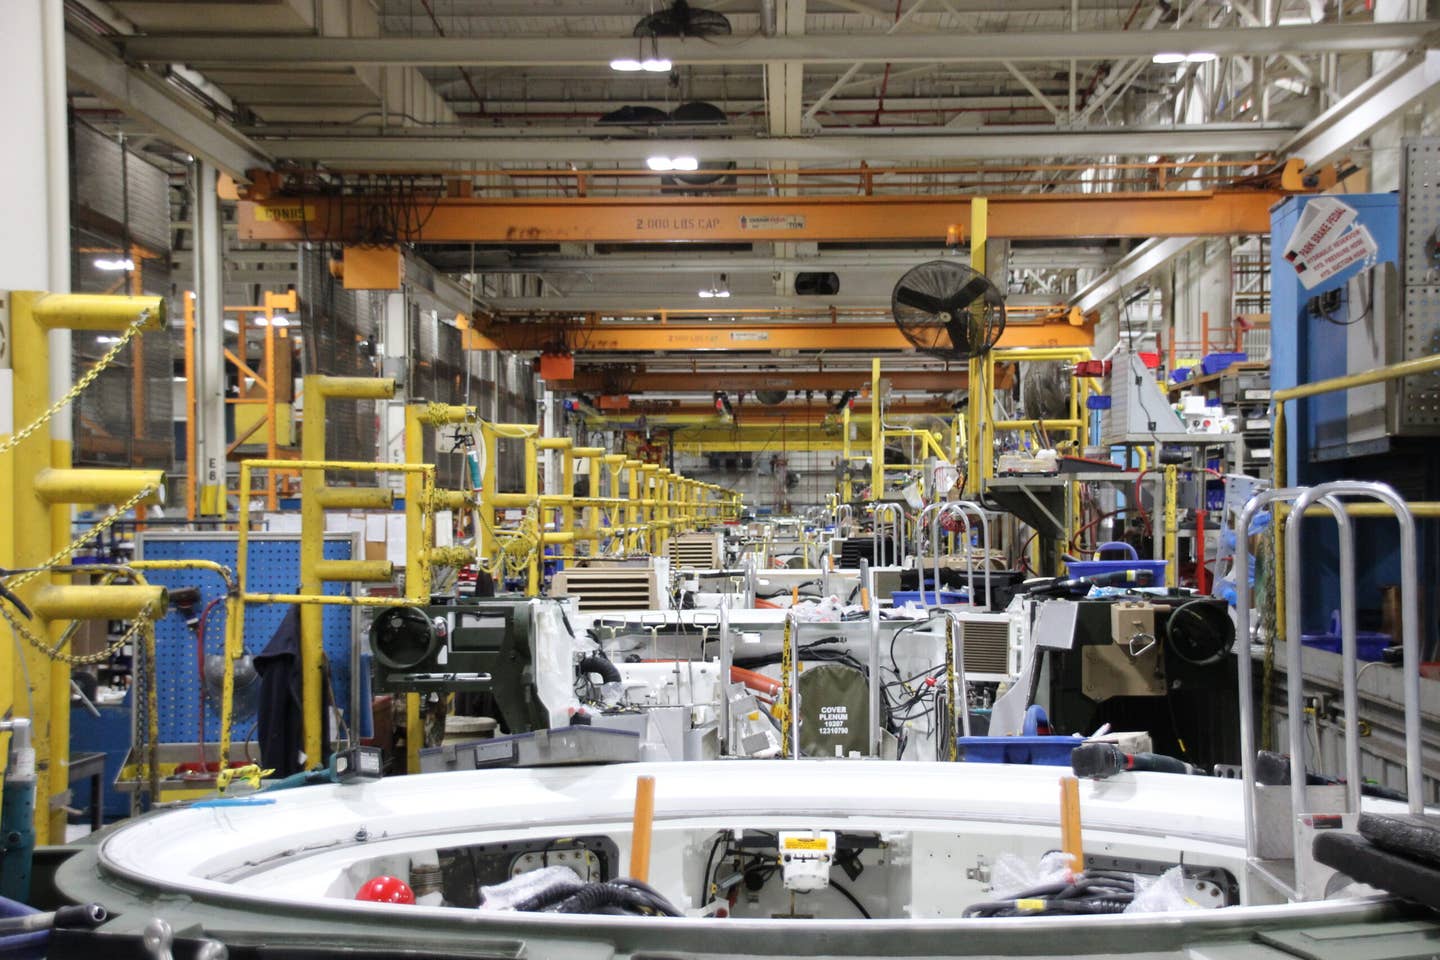 A look down the M1 Abrams assembly line at the Joint Systems Manufacturing Center-Lima, commonly called the Lima Army Tank Plant, in Ohio. <em>U.S. Army Tank-automotive and Armaments Command photo by Brian Hahn</em>